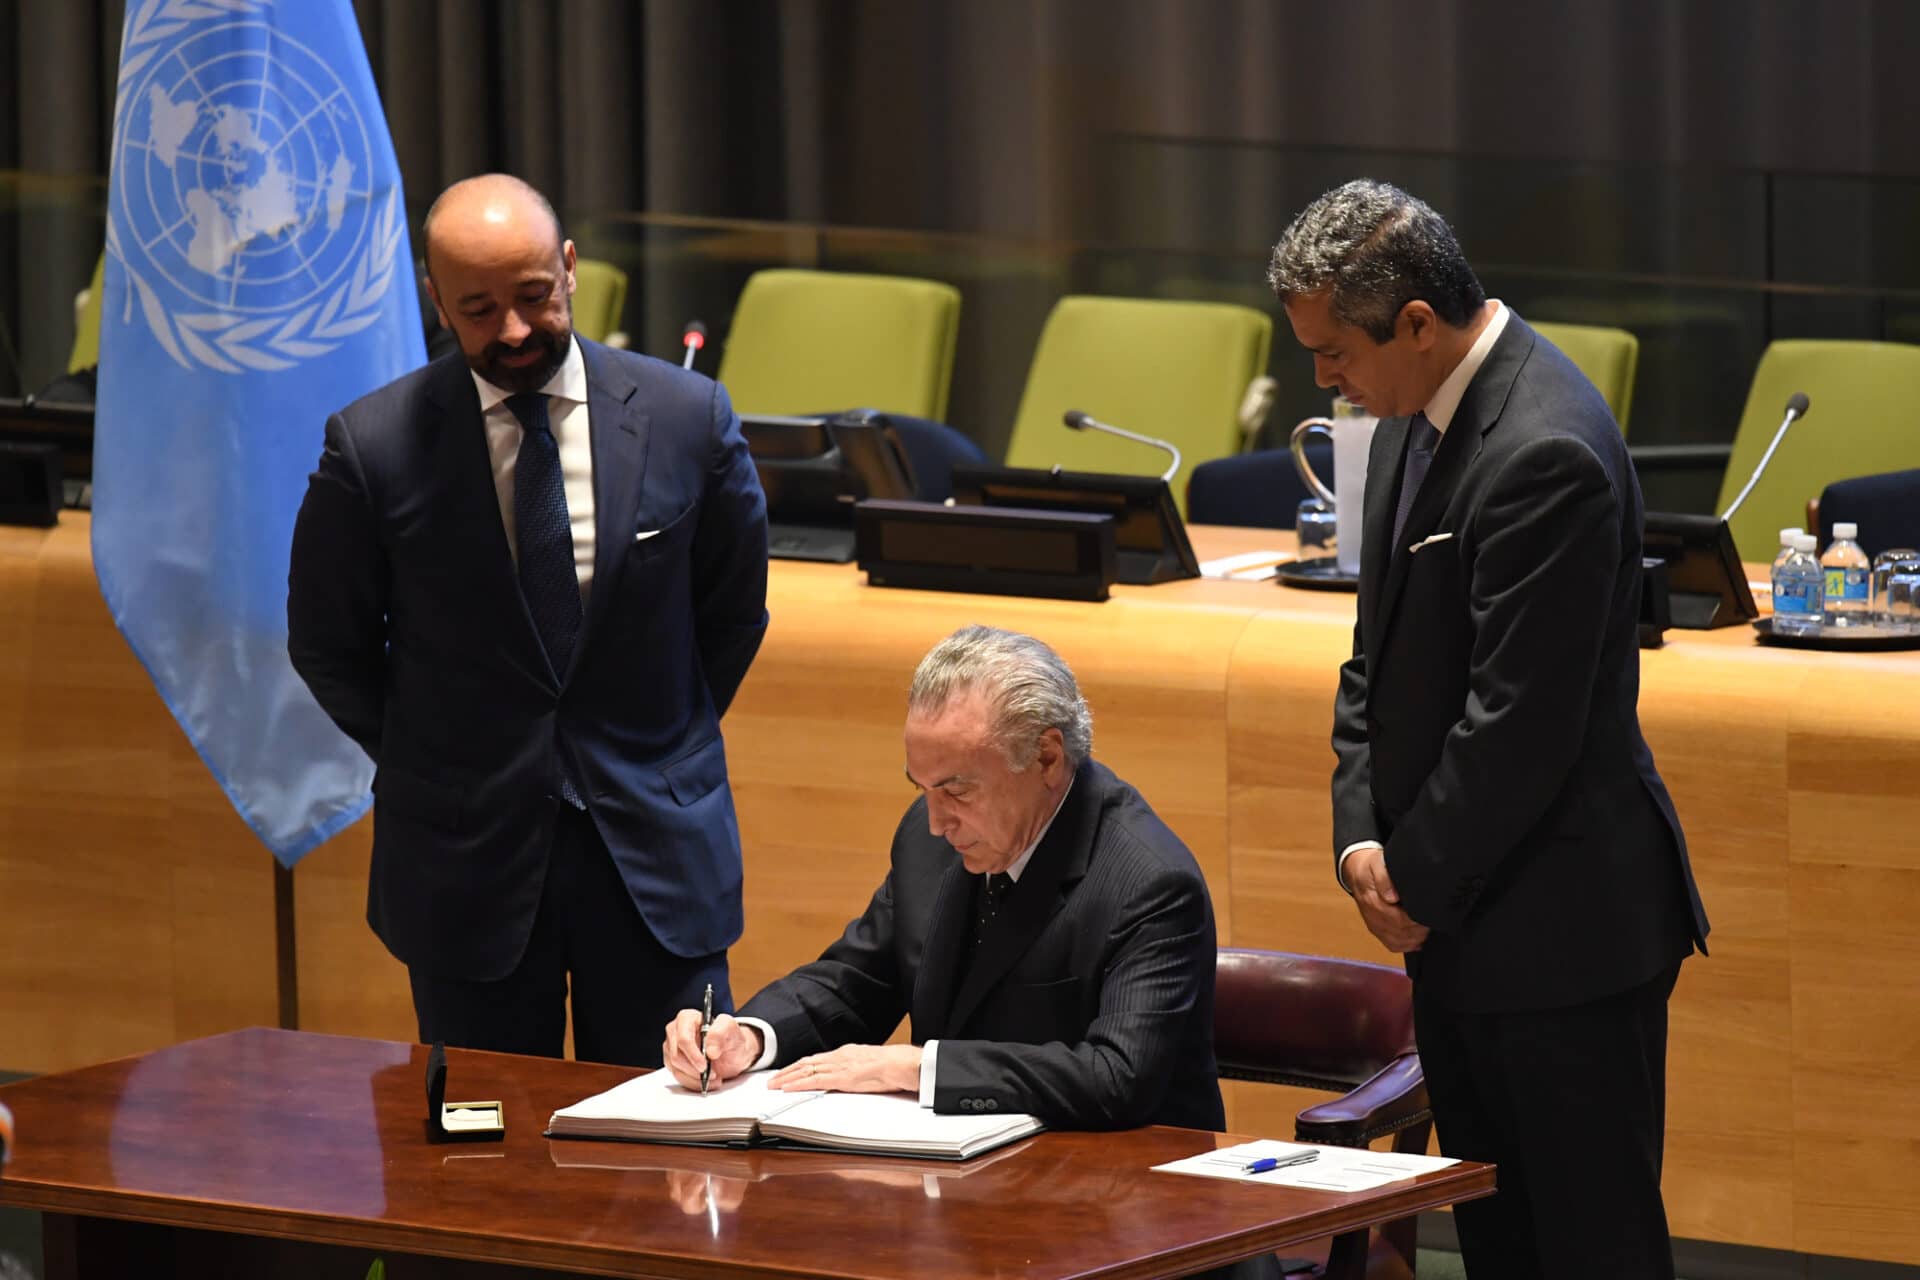 Then-President Michael Temer of Brazil signing the ban treaty